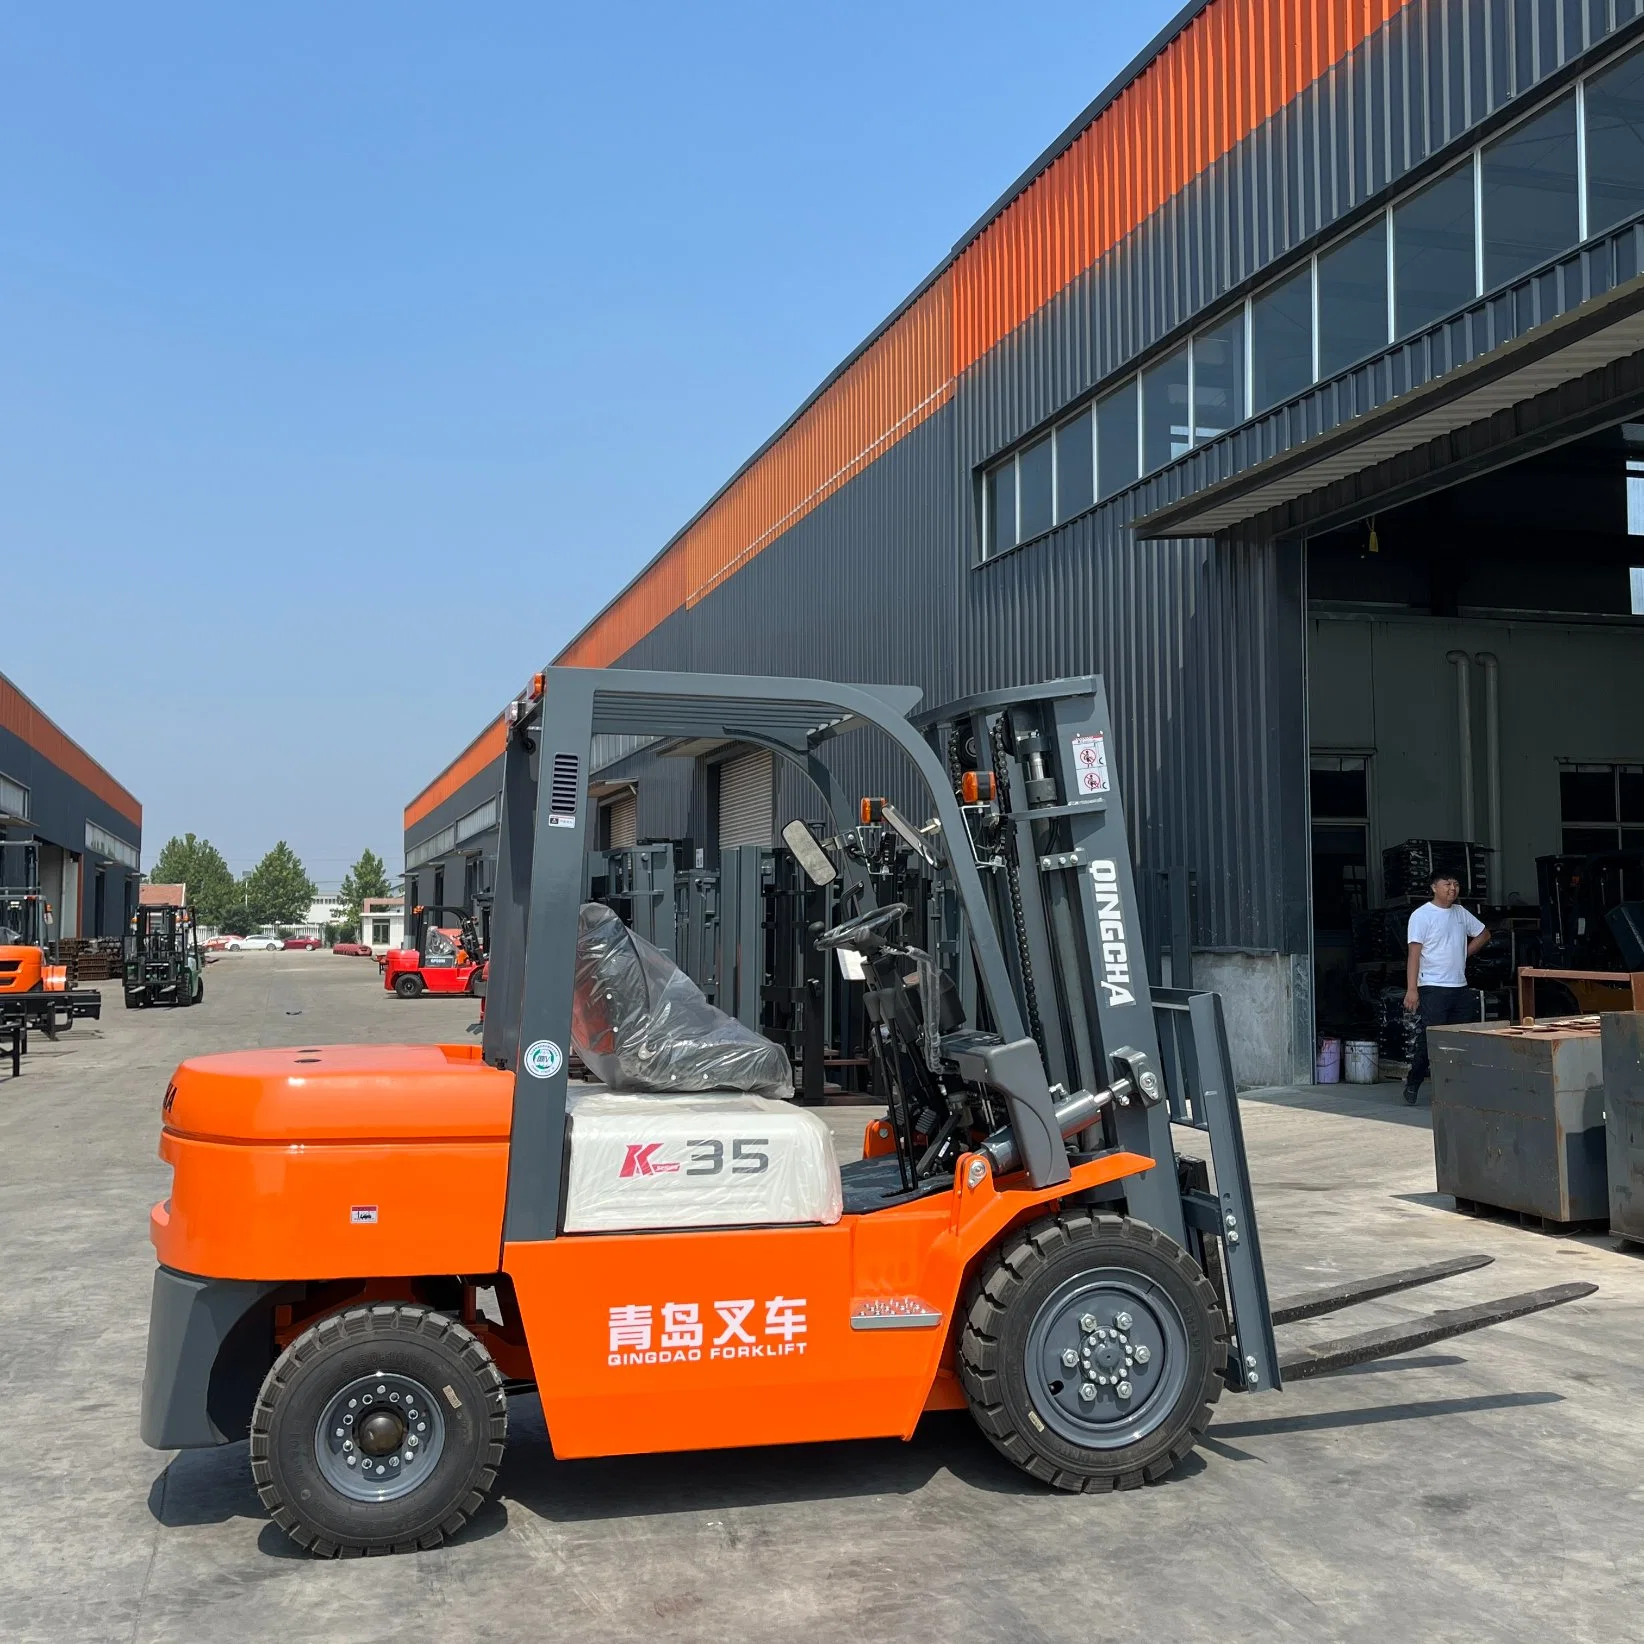 New 3t 3.5t 4t 5t 7t 3m 3.5m 4m 4.5m Chinese/ Japanese/Nissan Engine Diesel LPG Gasoline CE ISO Wheel Mechanical /Automatic Forklift in Stock